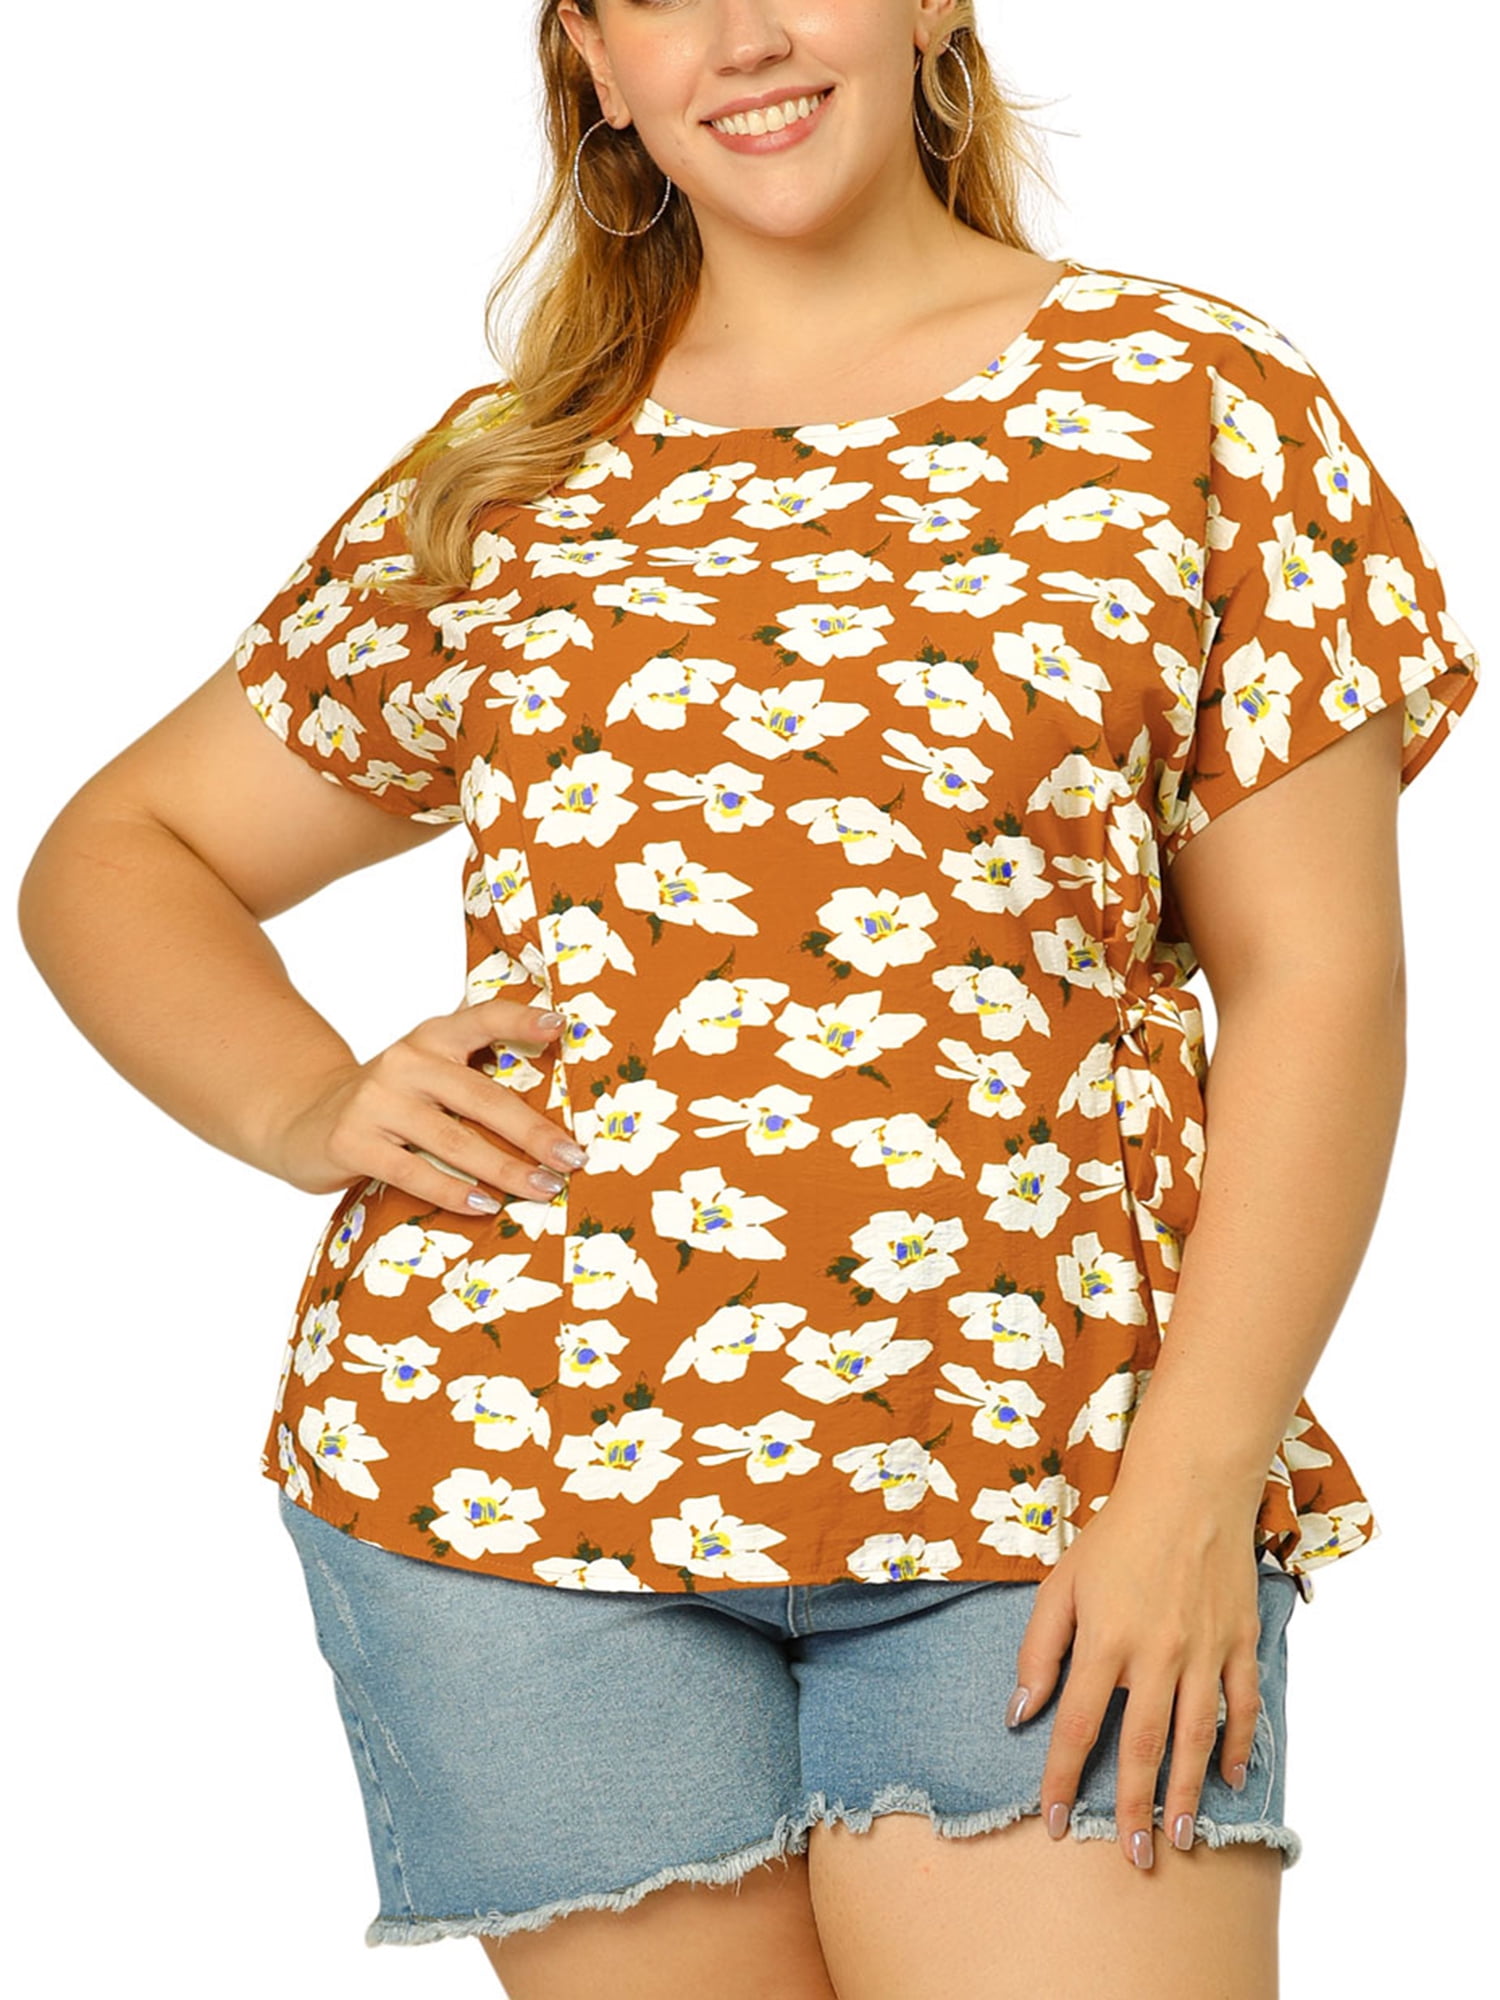 Women's Casual Summer Tops Plus Size Fashion Clothes Printed